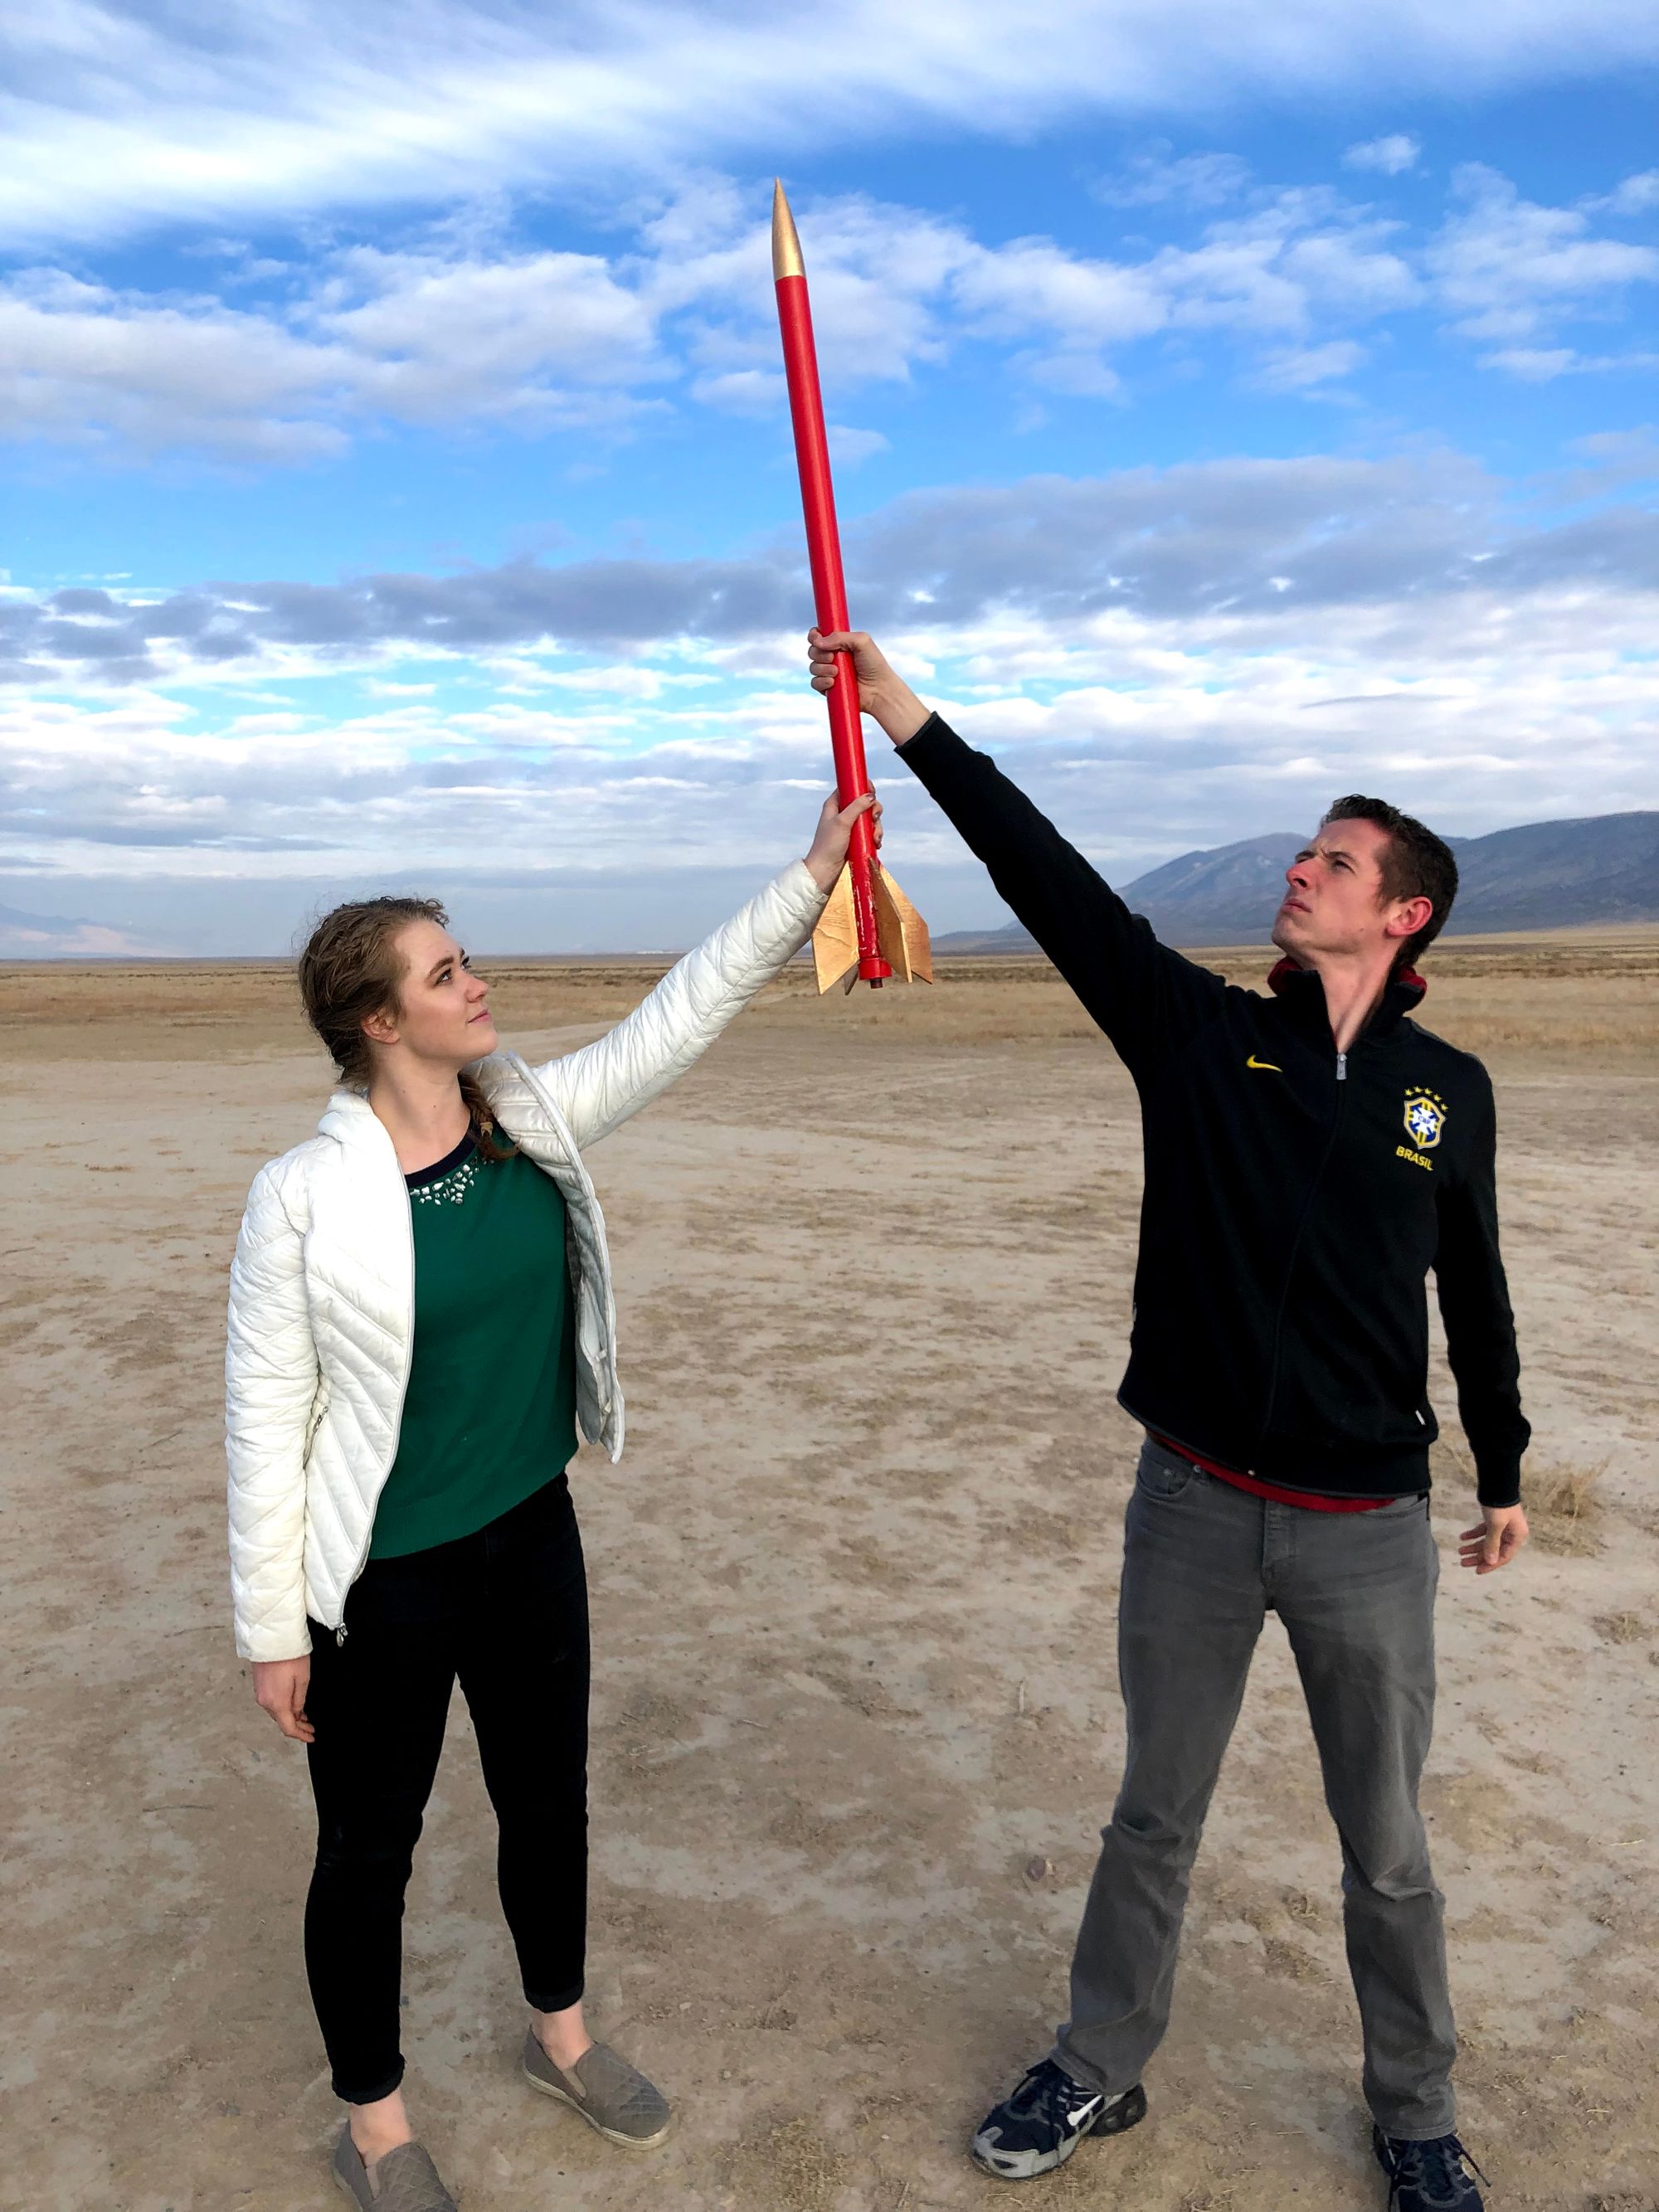 BYU Rocketry Student Launch Competition